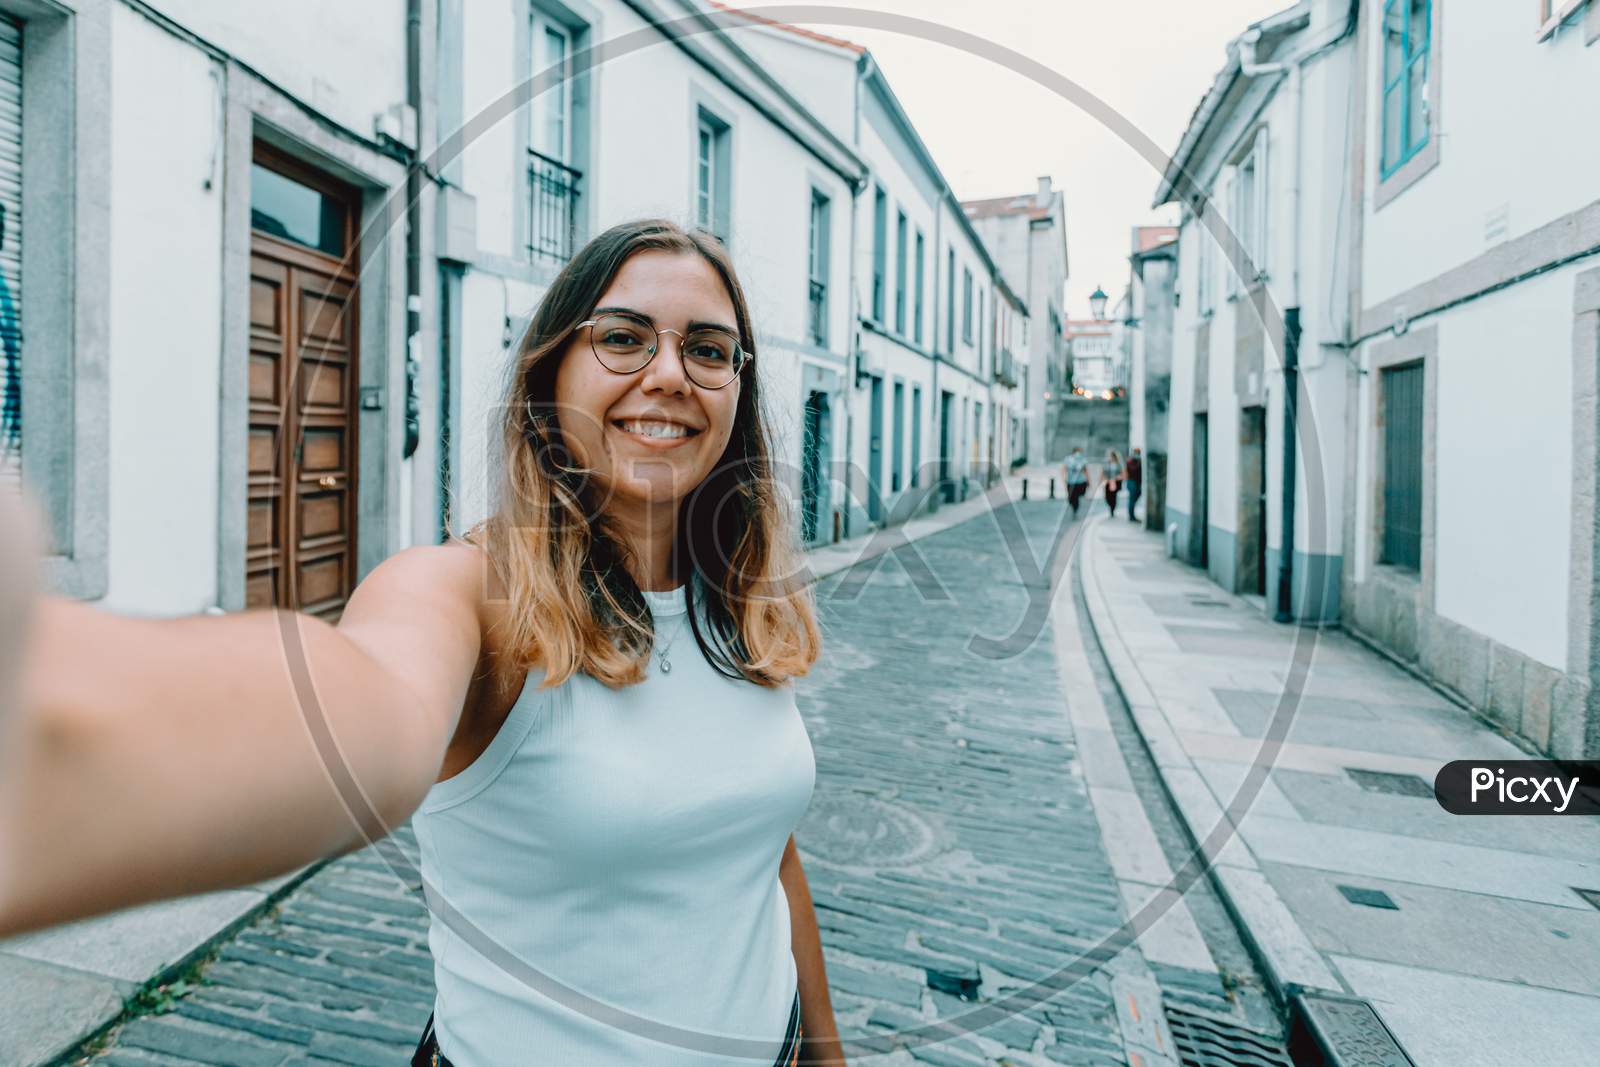 Young Woman With Glasses Taking A Selfie On A Old Spanish Street